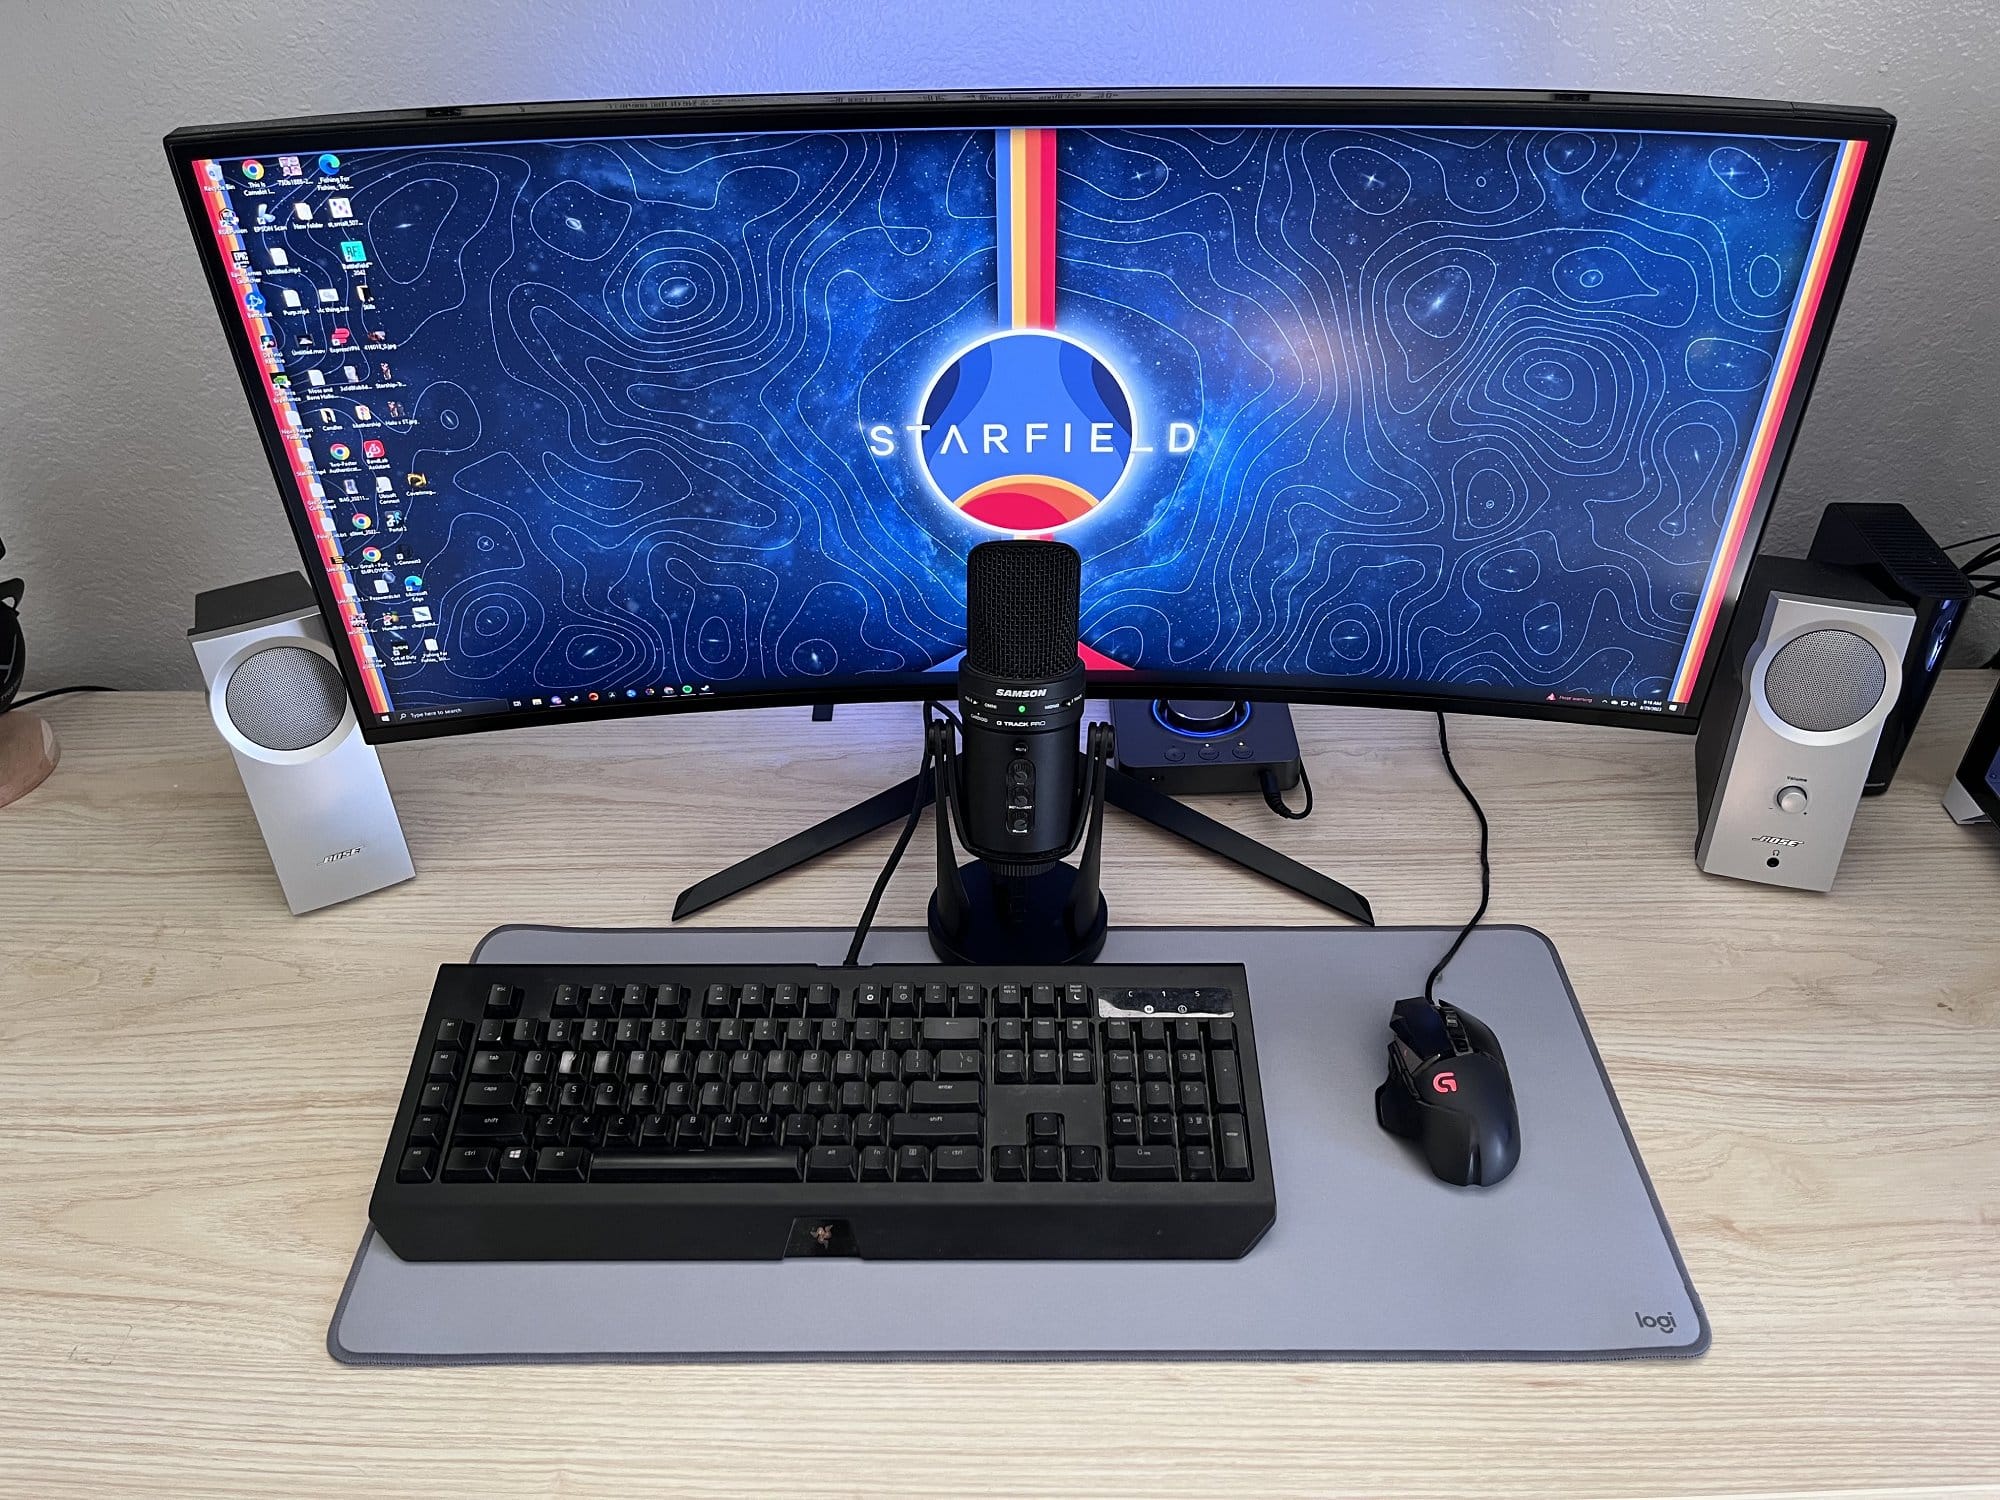 A curved monitor displaying a space-themed wallpaper with STARFIELD logo, flanked by stereo speakers, with a mechanical keyboard, gaming mouse, and professional microphone on a desk mat